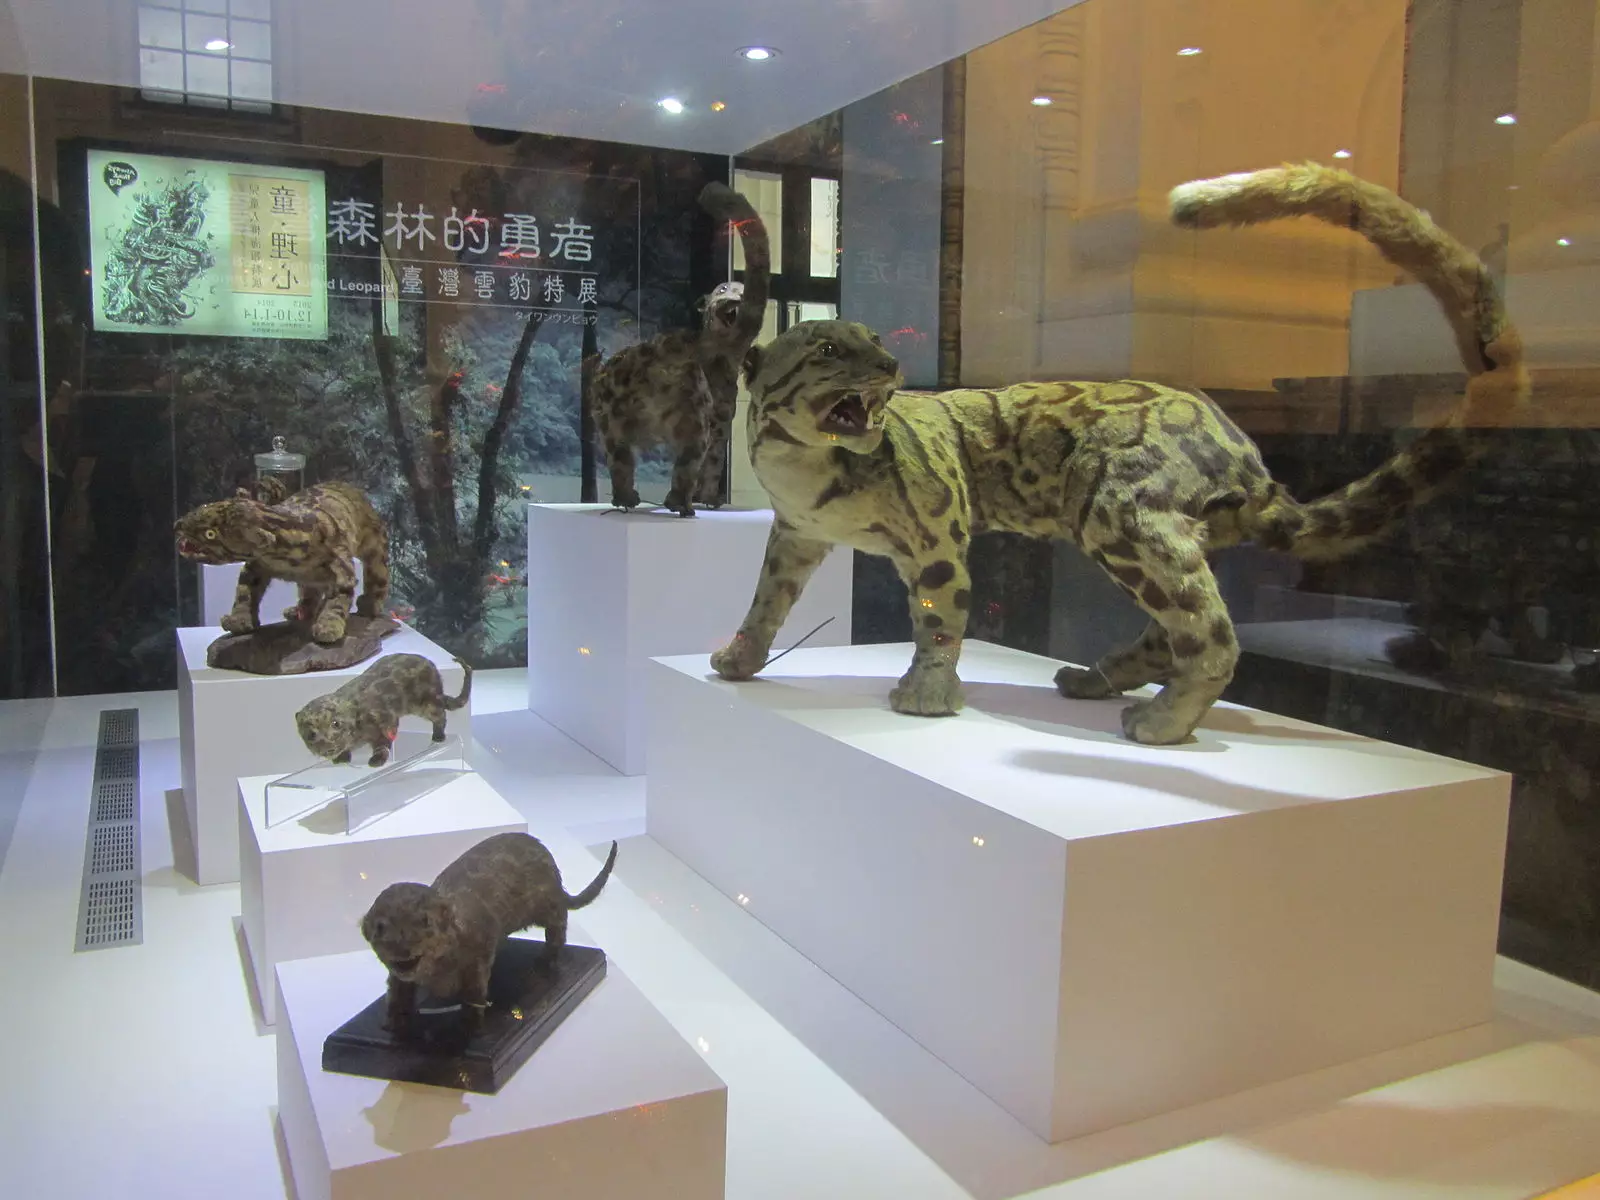 Specimen of the animal in the National Taiwan Museum.